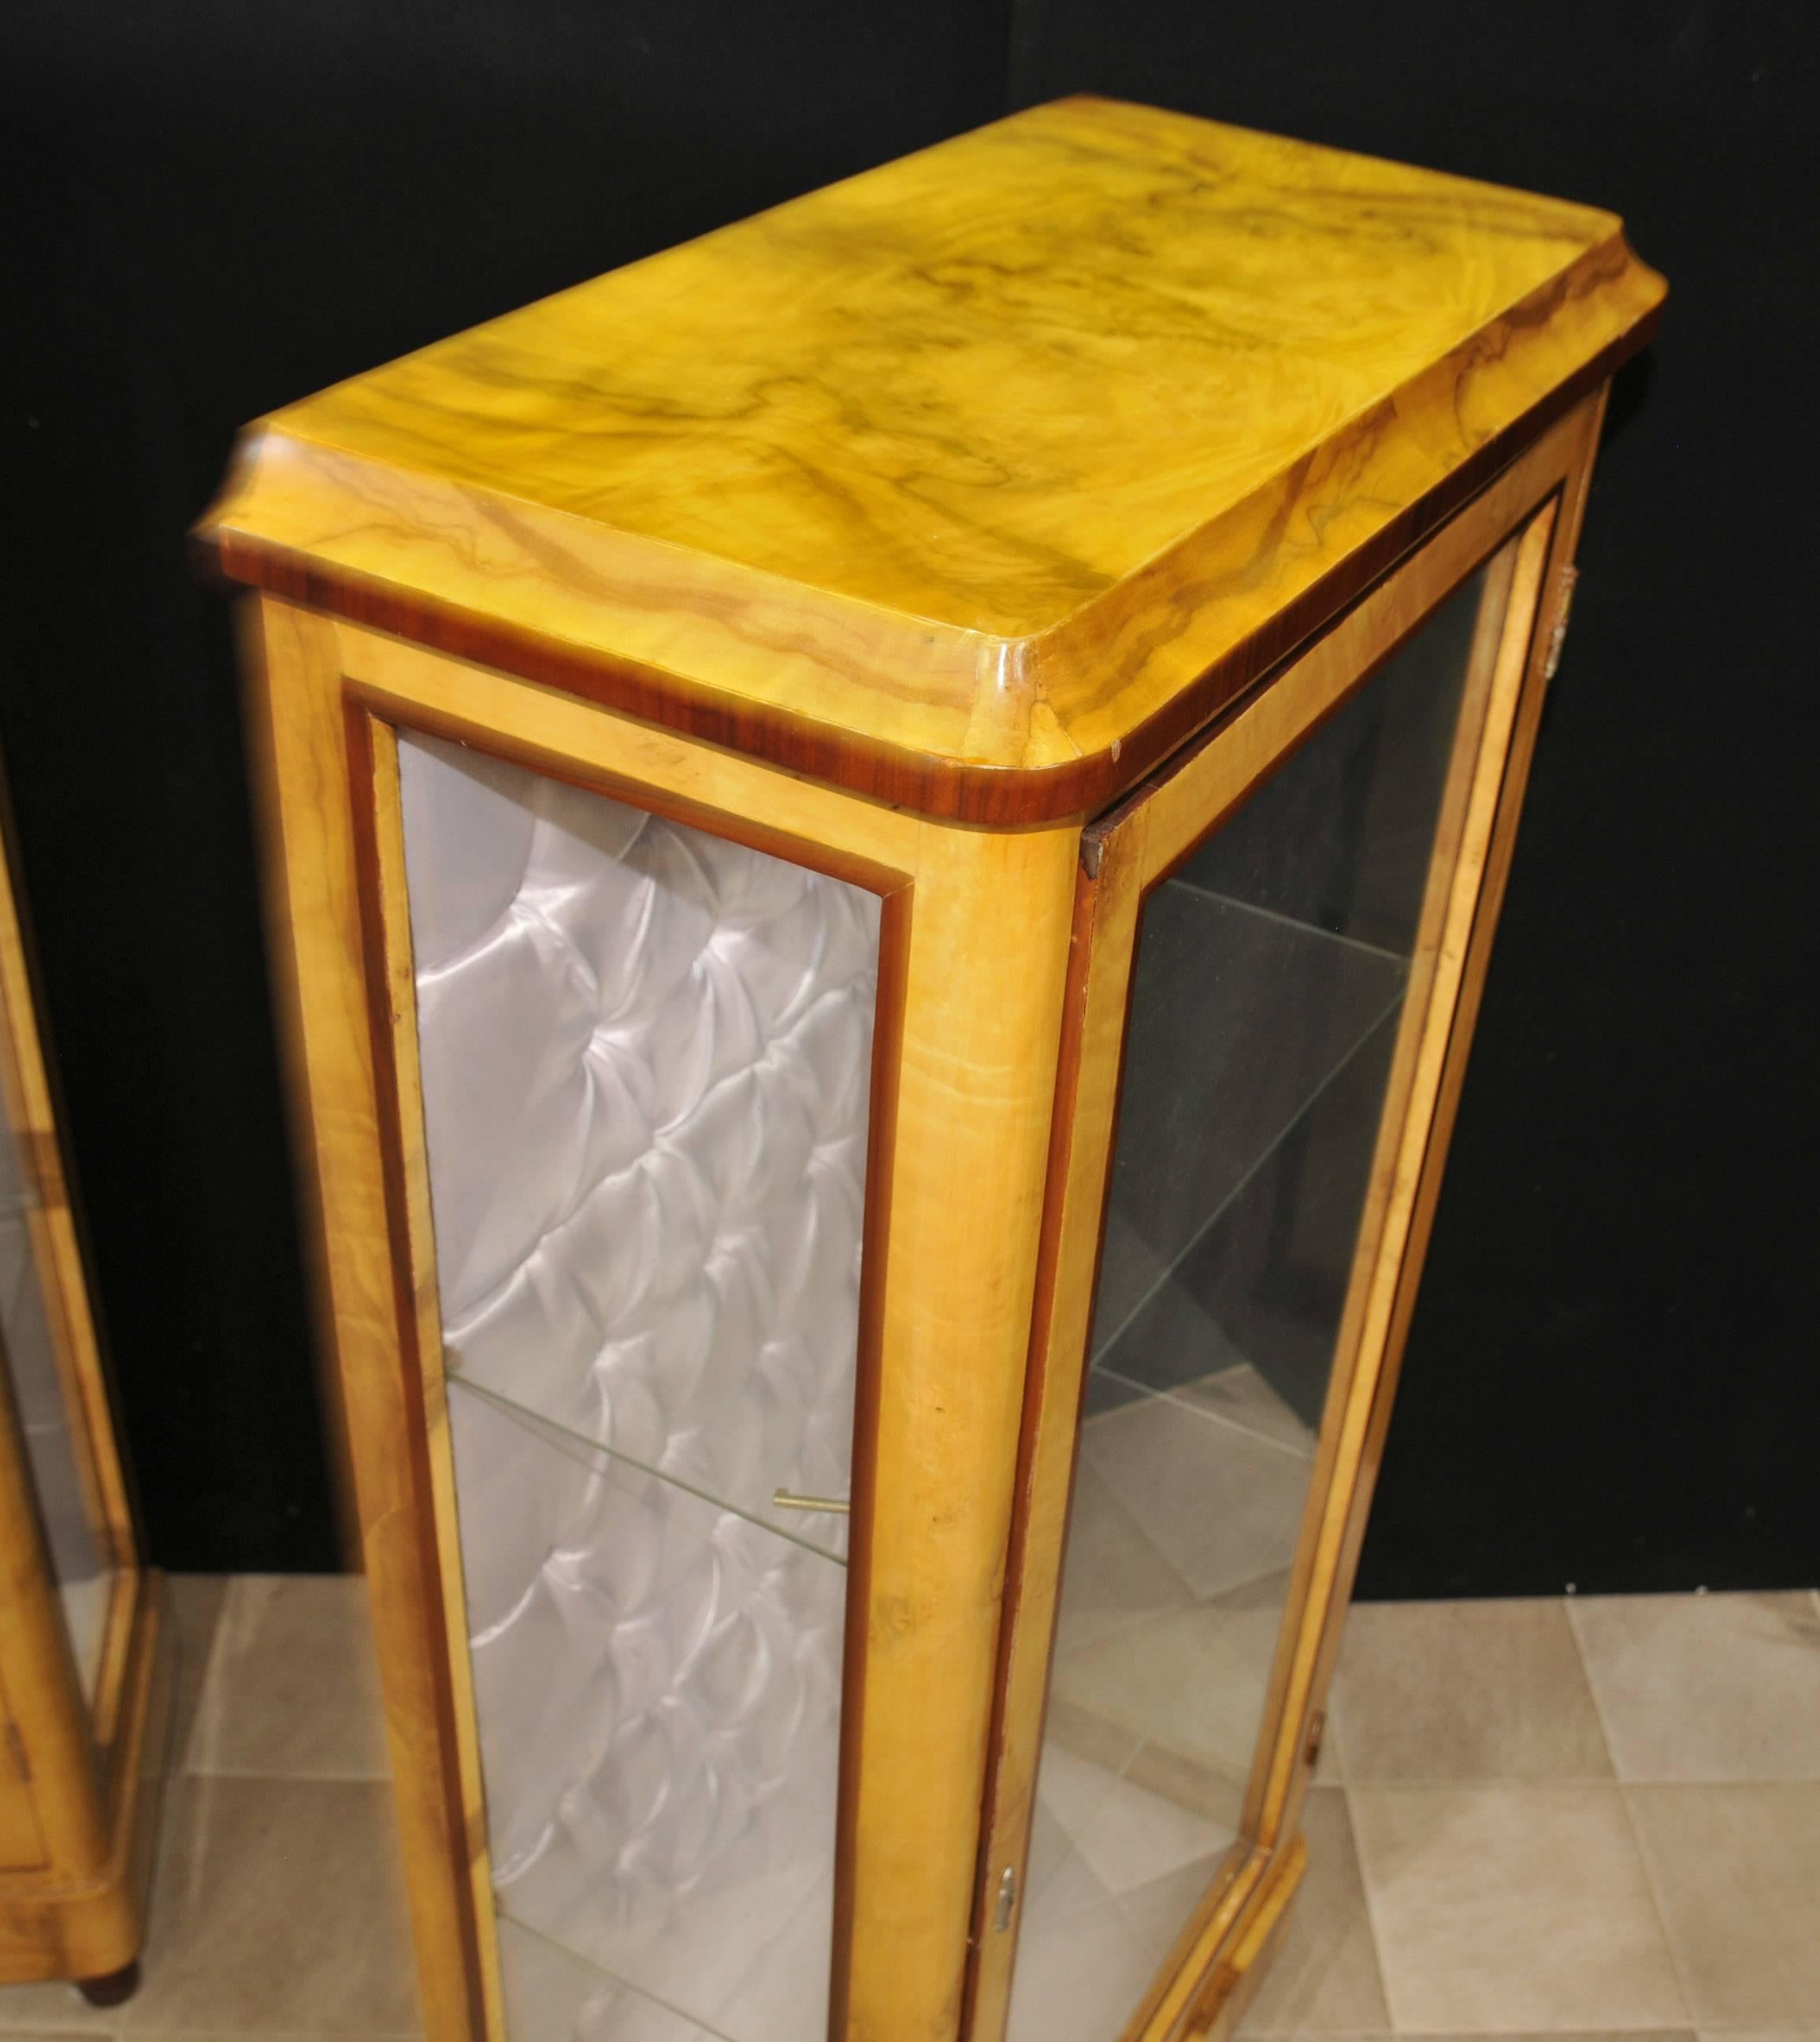 Appointments to view possible at our North London / Herts Canonbury Antiques showroom.
Sumptuous pair of art deco style display cabinets in blonde walnut.
Hope the photos do them some justice better in the flesh.
Great for displaying decorative